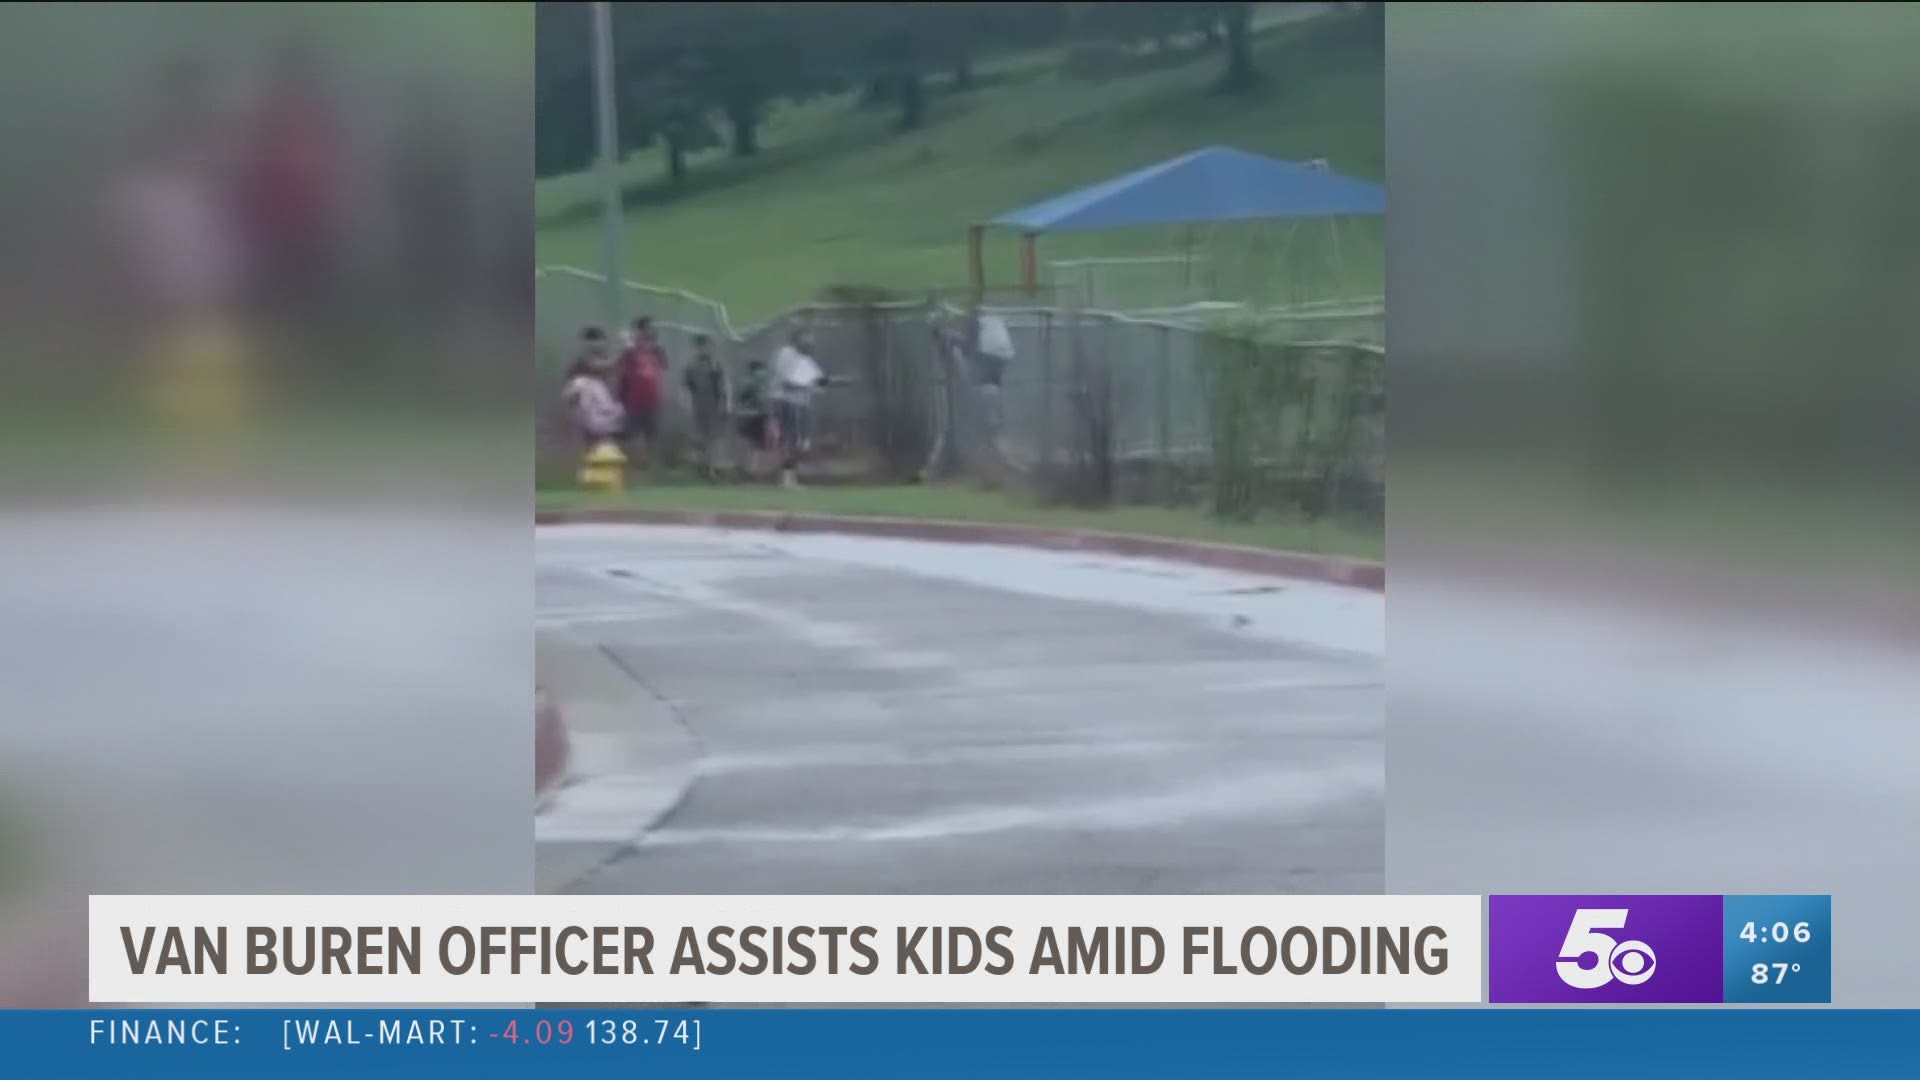 School Resource Officer, David Passen, said he has developed a close relationship with the ‘kiddos’ and thinks of them as his own family. https://bit.ly/3m6U7R4